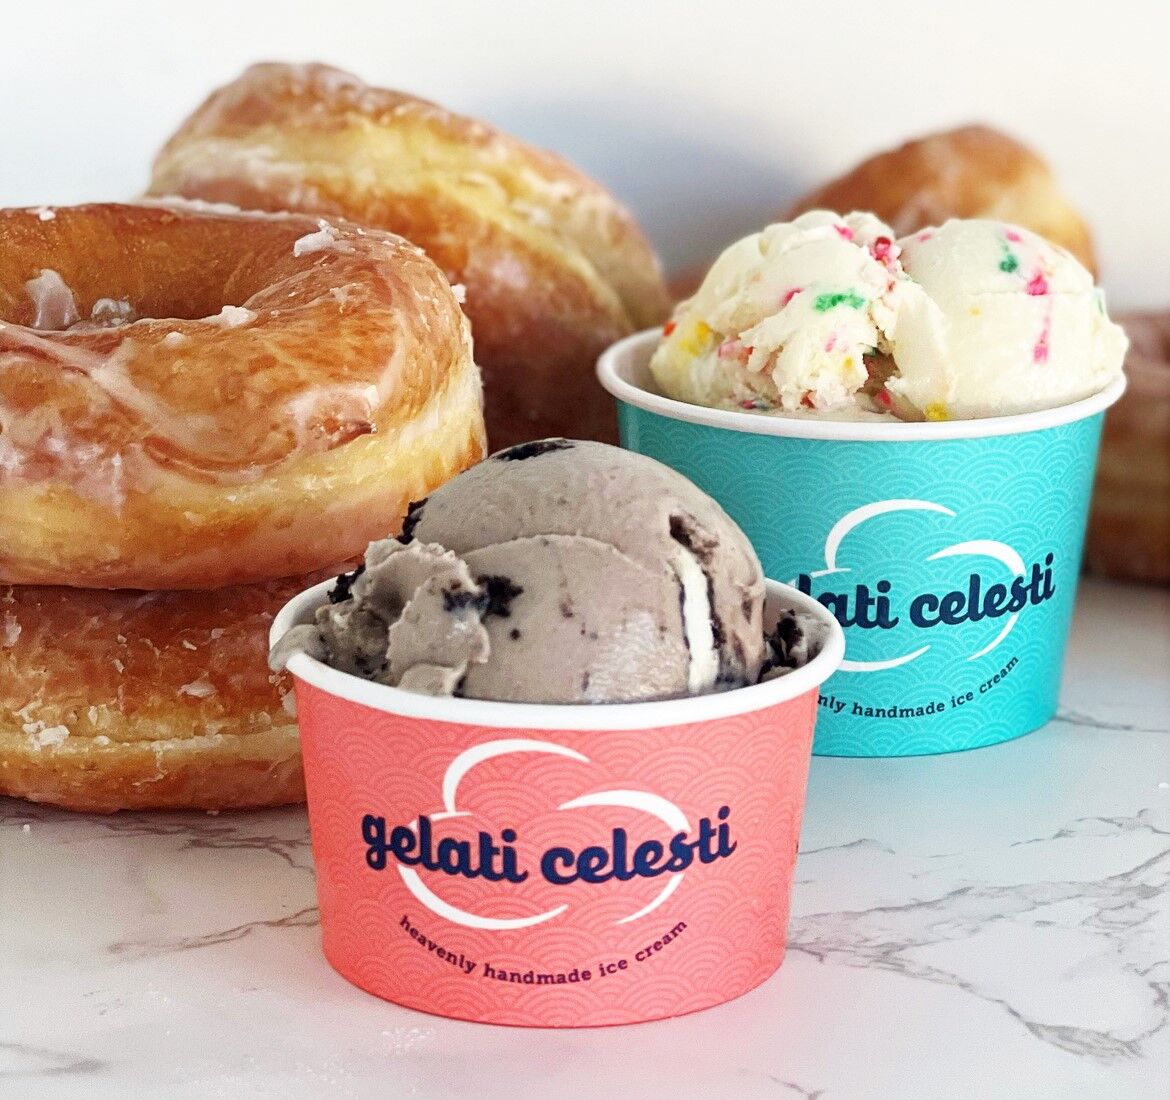 Gelati Celesti to offer free doughnuts on National Ice Cream for Breakfast Day to customers in